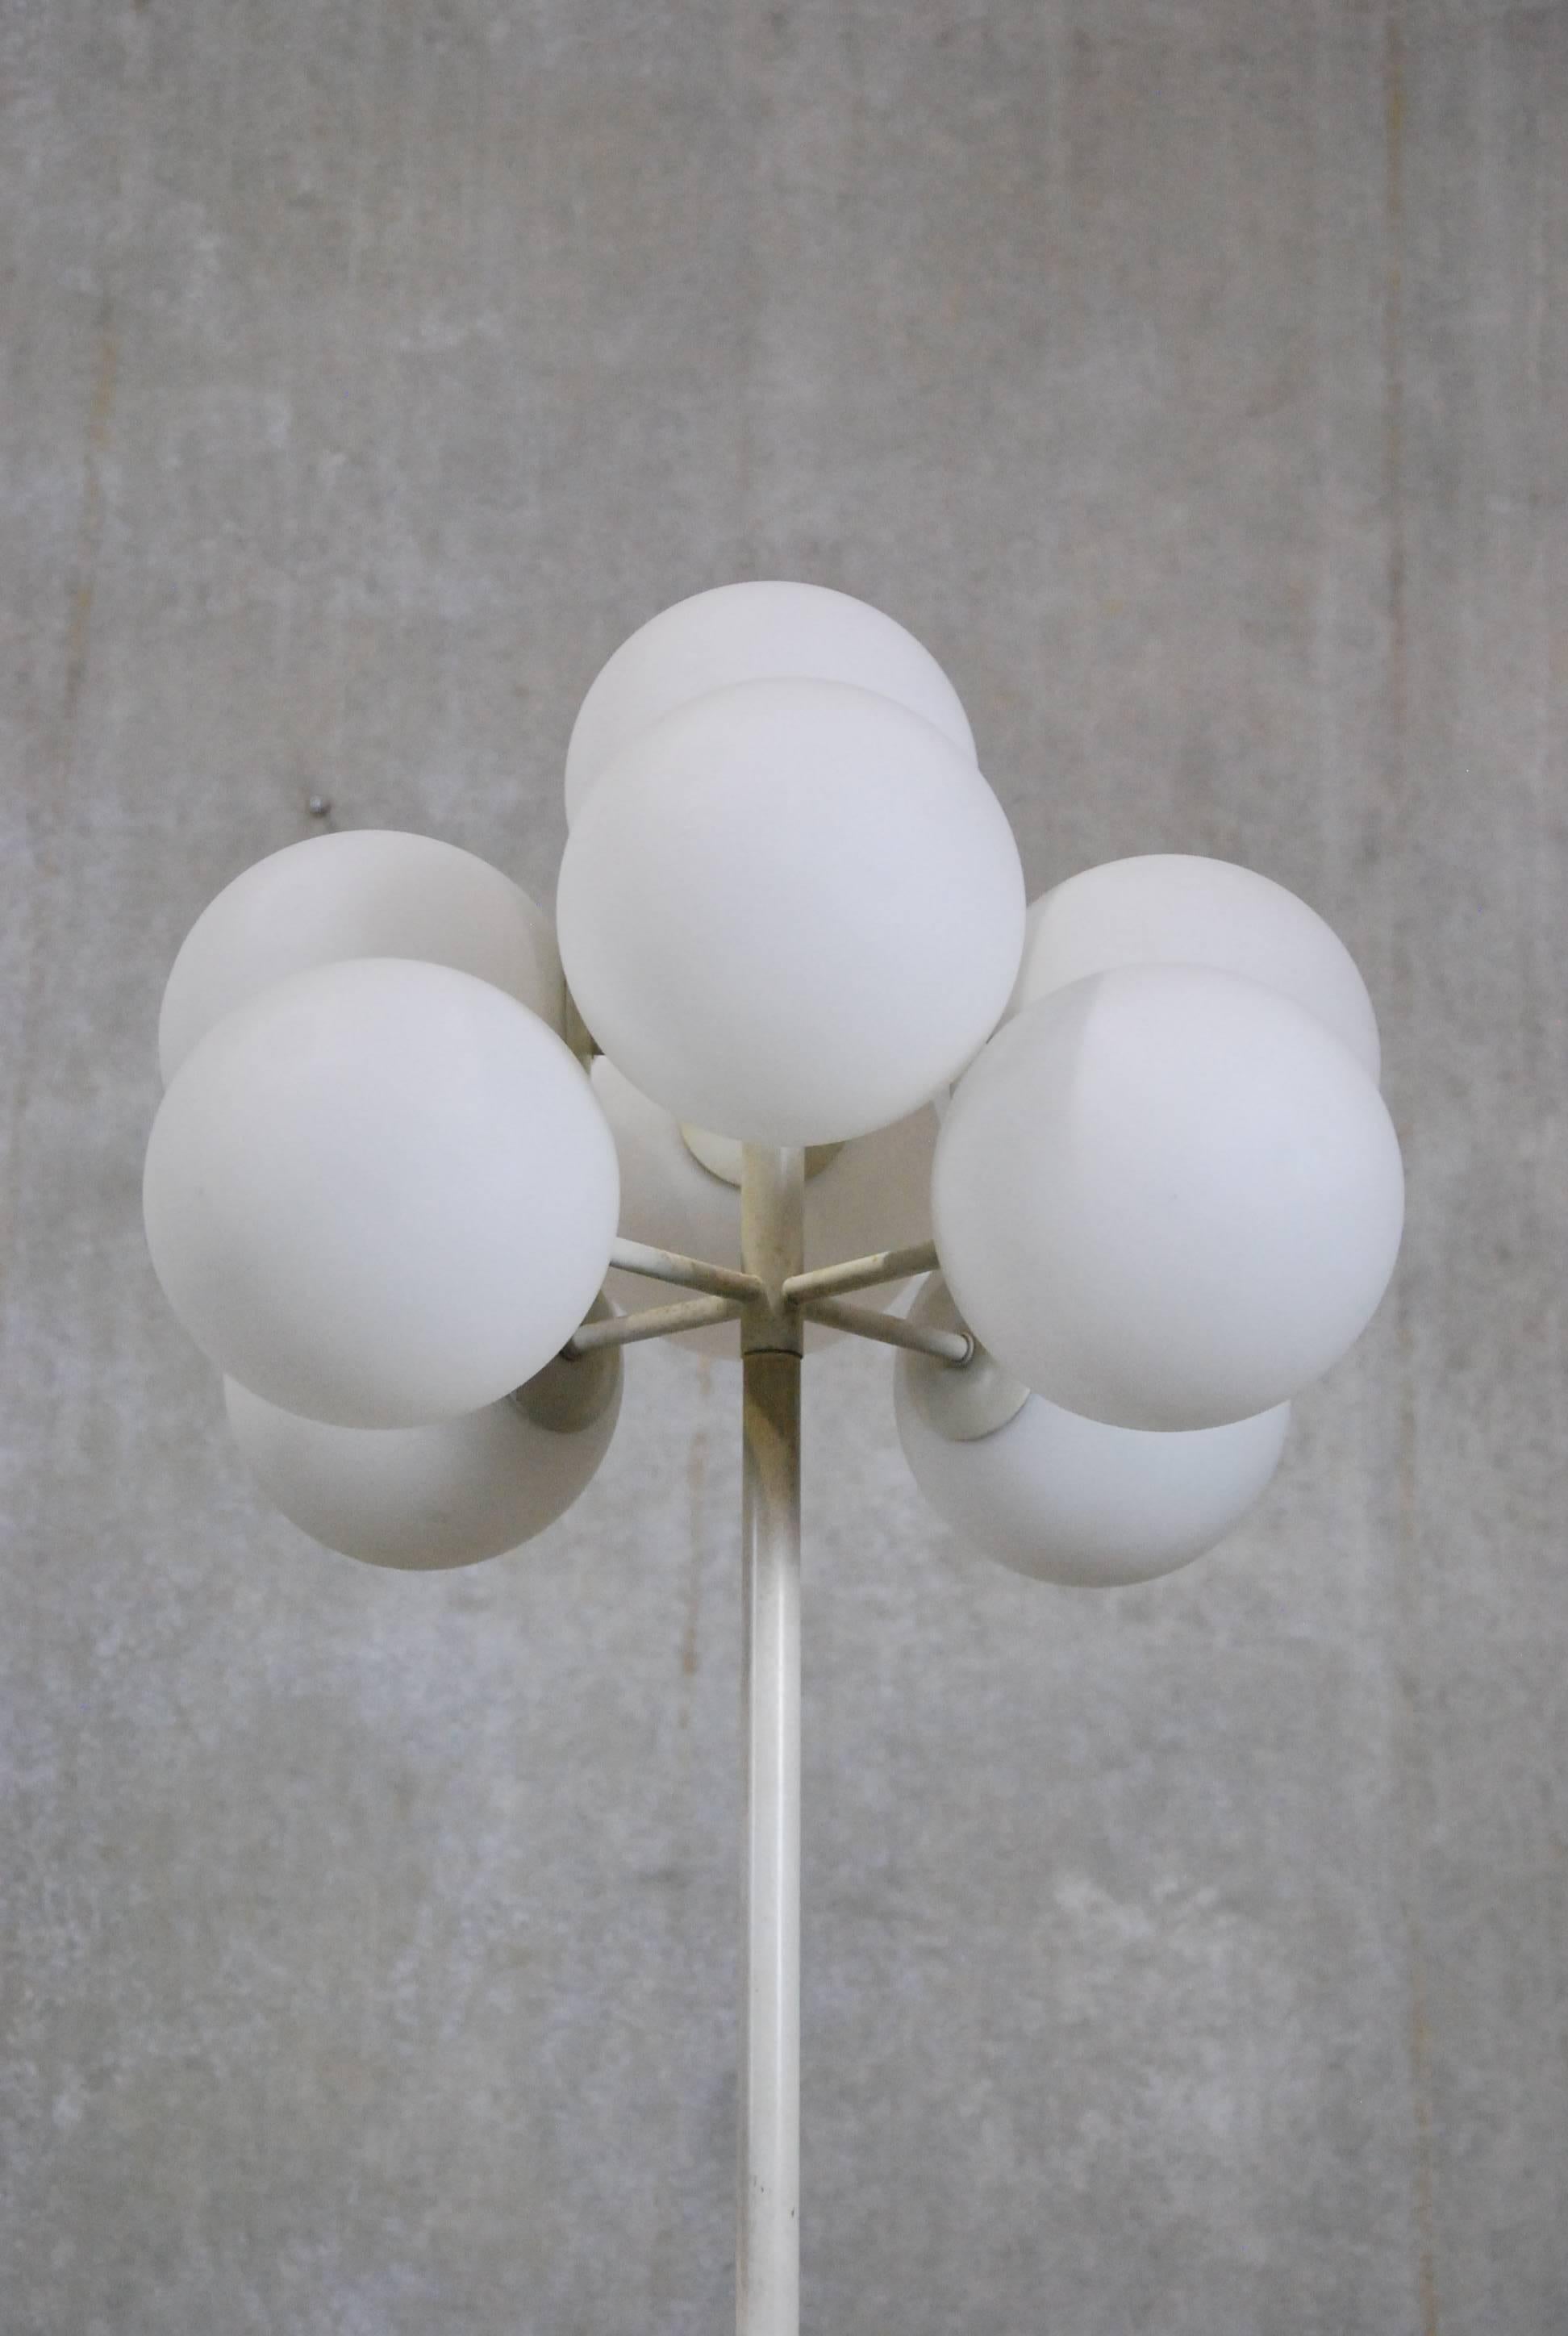 Single Max Bill rare floor lamp with individual frosted globes with threading to accurately attach to each arm.
White lacquer over metal...original untouched finish.